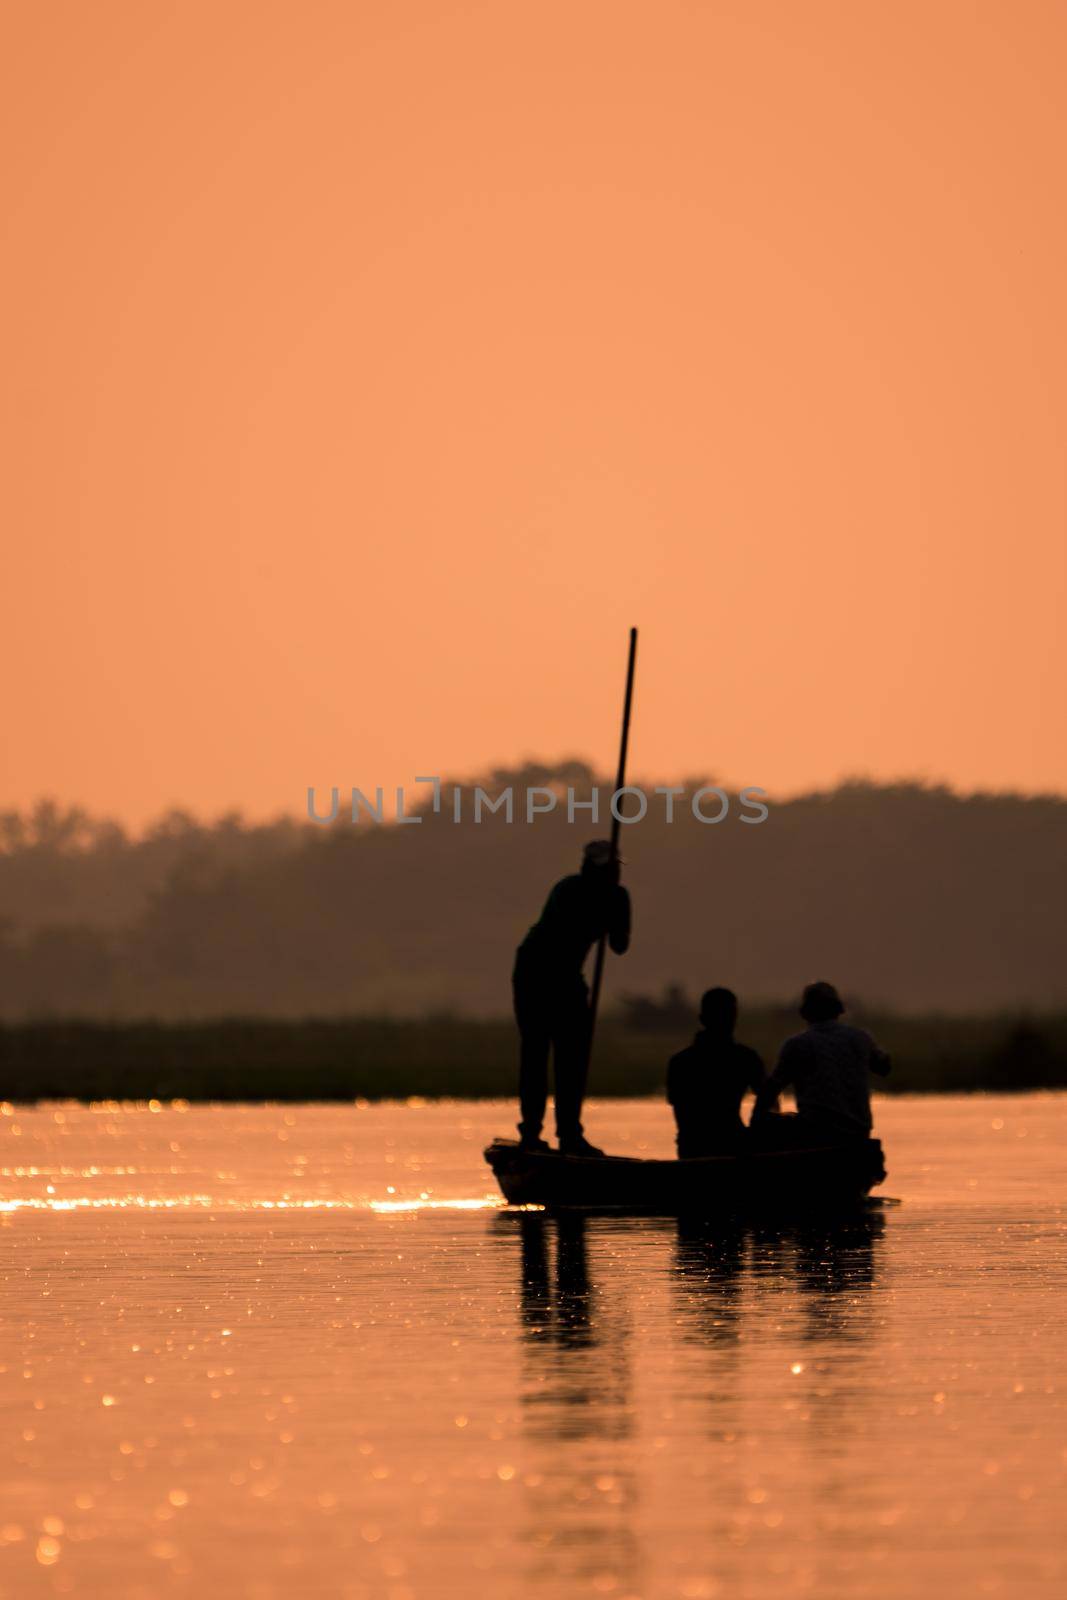 Blurred Men in a boat on a river silhouette by Arsgera